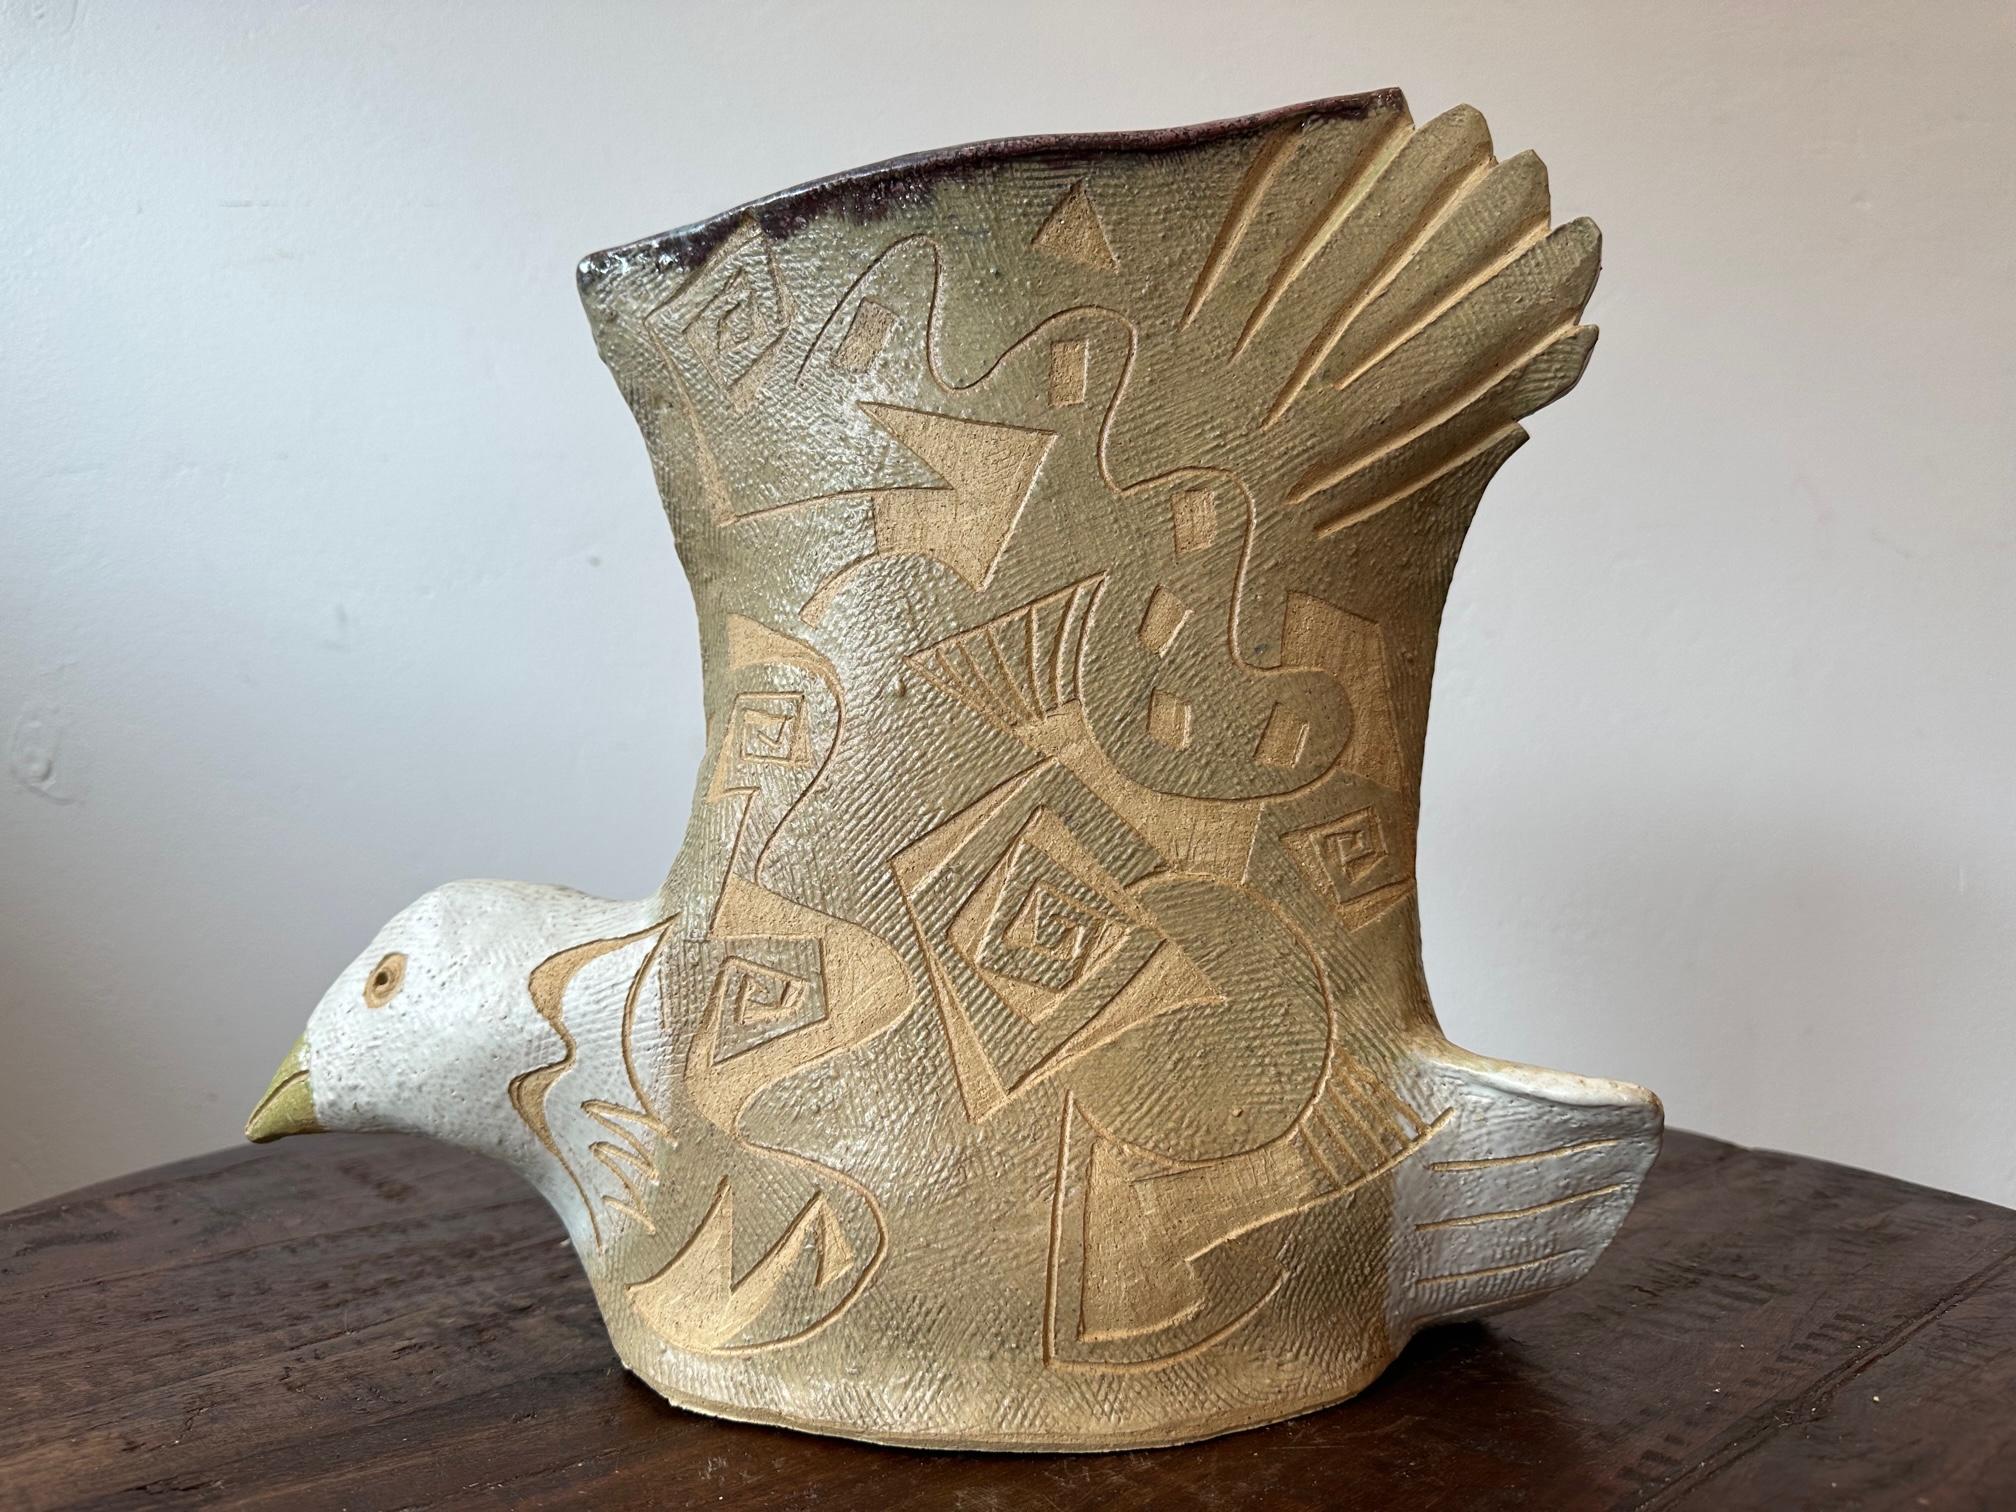 Functional Art Sculpture one of a kind by Marc Zimmerman

Freedom Bird Vase  - Clay Sculpture 

This whimsical clay sculpture, created by the talented artist Marc Zimmerman, stands out as a one-of-a-kind masterpiece. Zimmerman's remarkable Clay